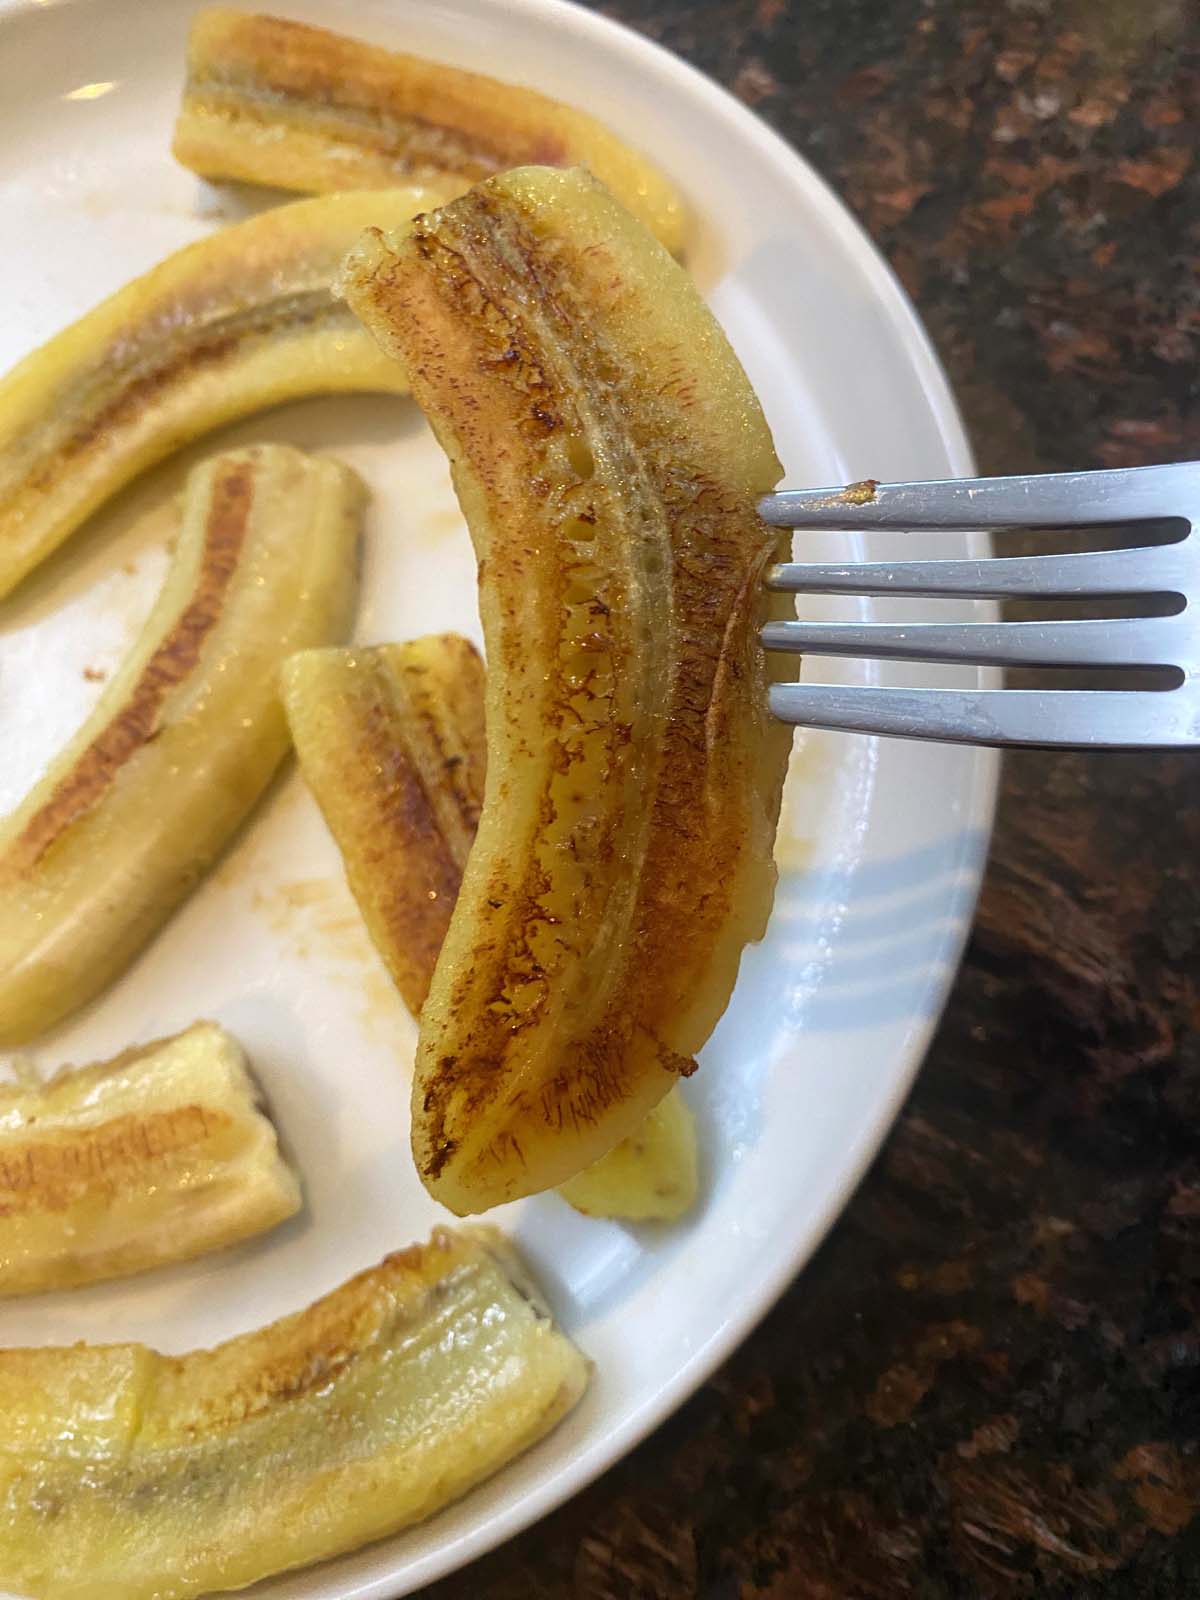 Fried bananas on a white plate.